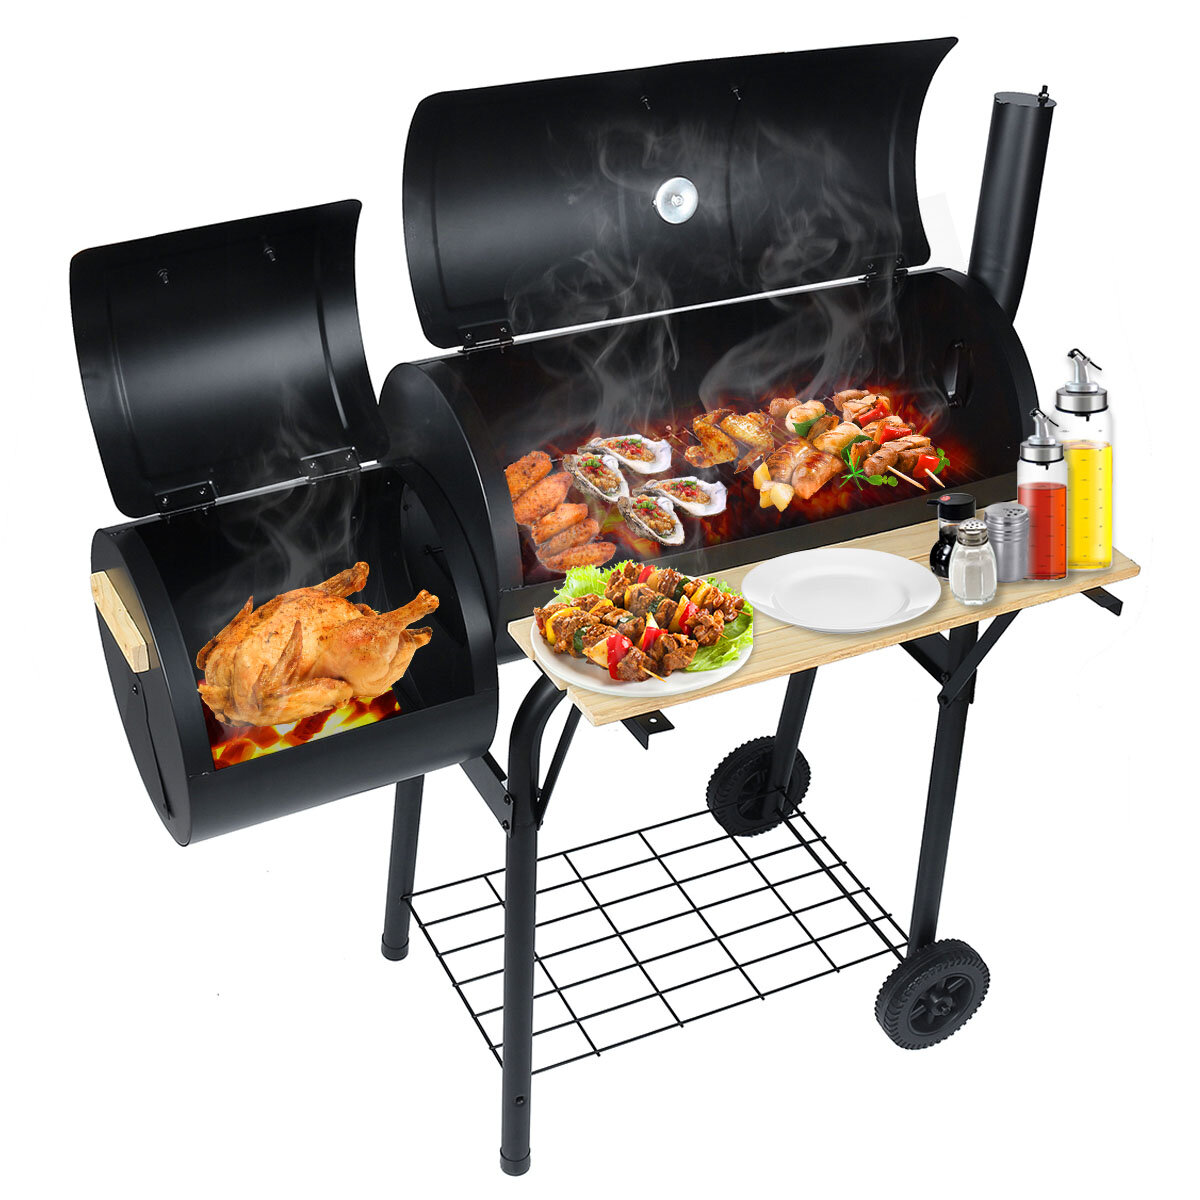 45 Fire Pit Bbq Grill Meat Charcoal, Char Broil Fire Pit